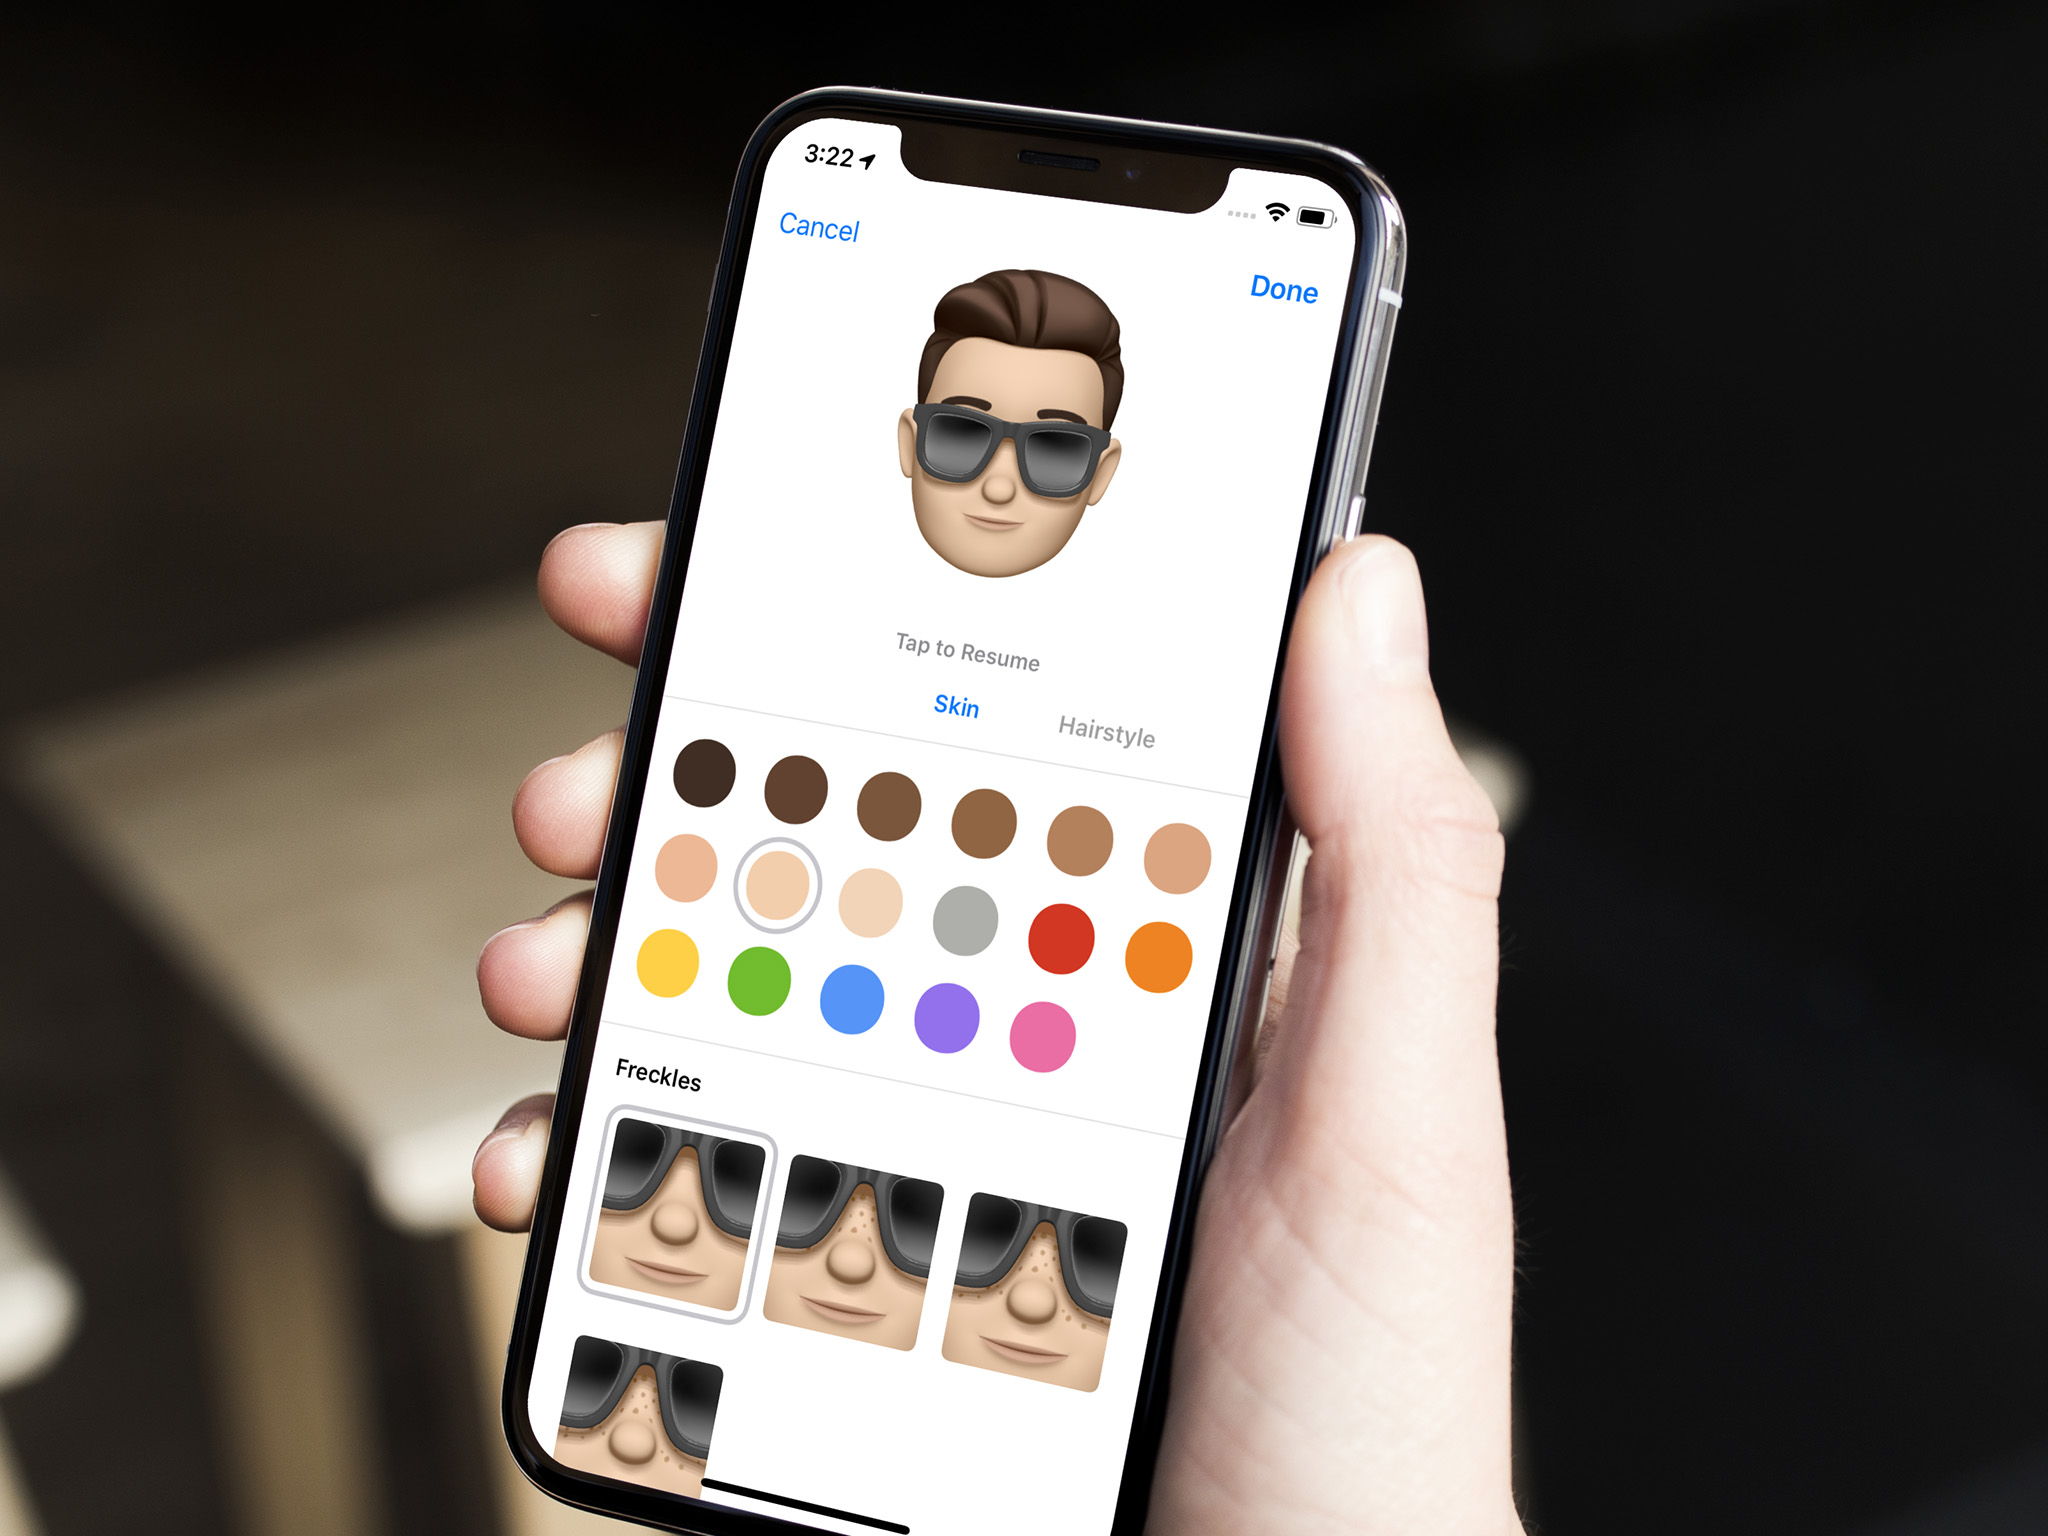 How to share Animoji to any social network